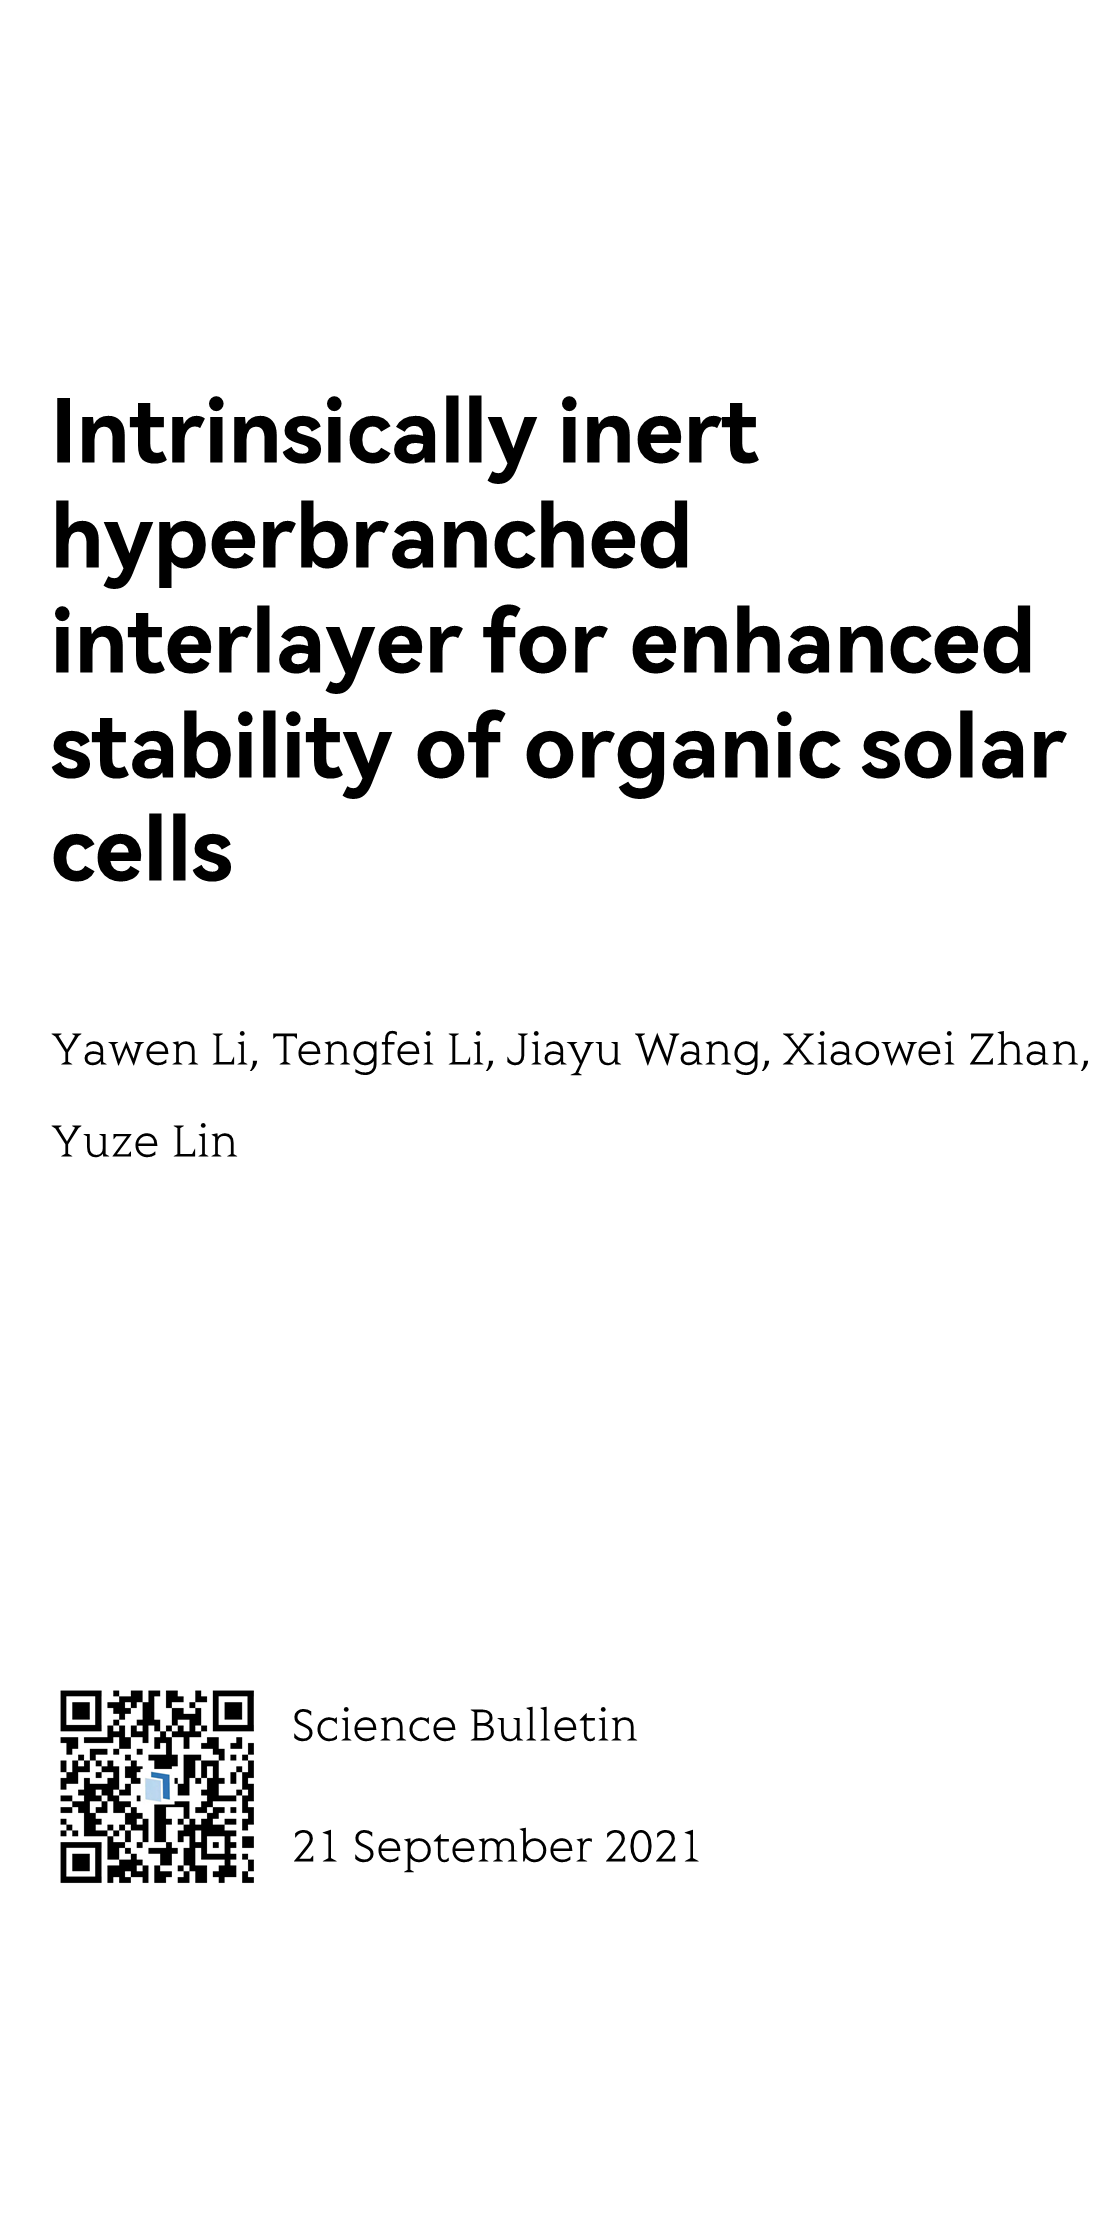 Intrinsically inert hyperbranched interlayer for enhanced stability of organic solar cells_1